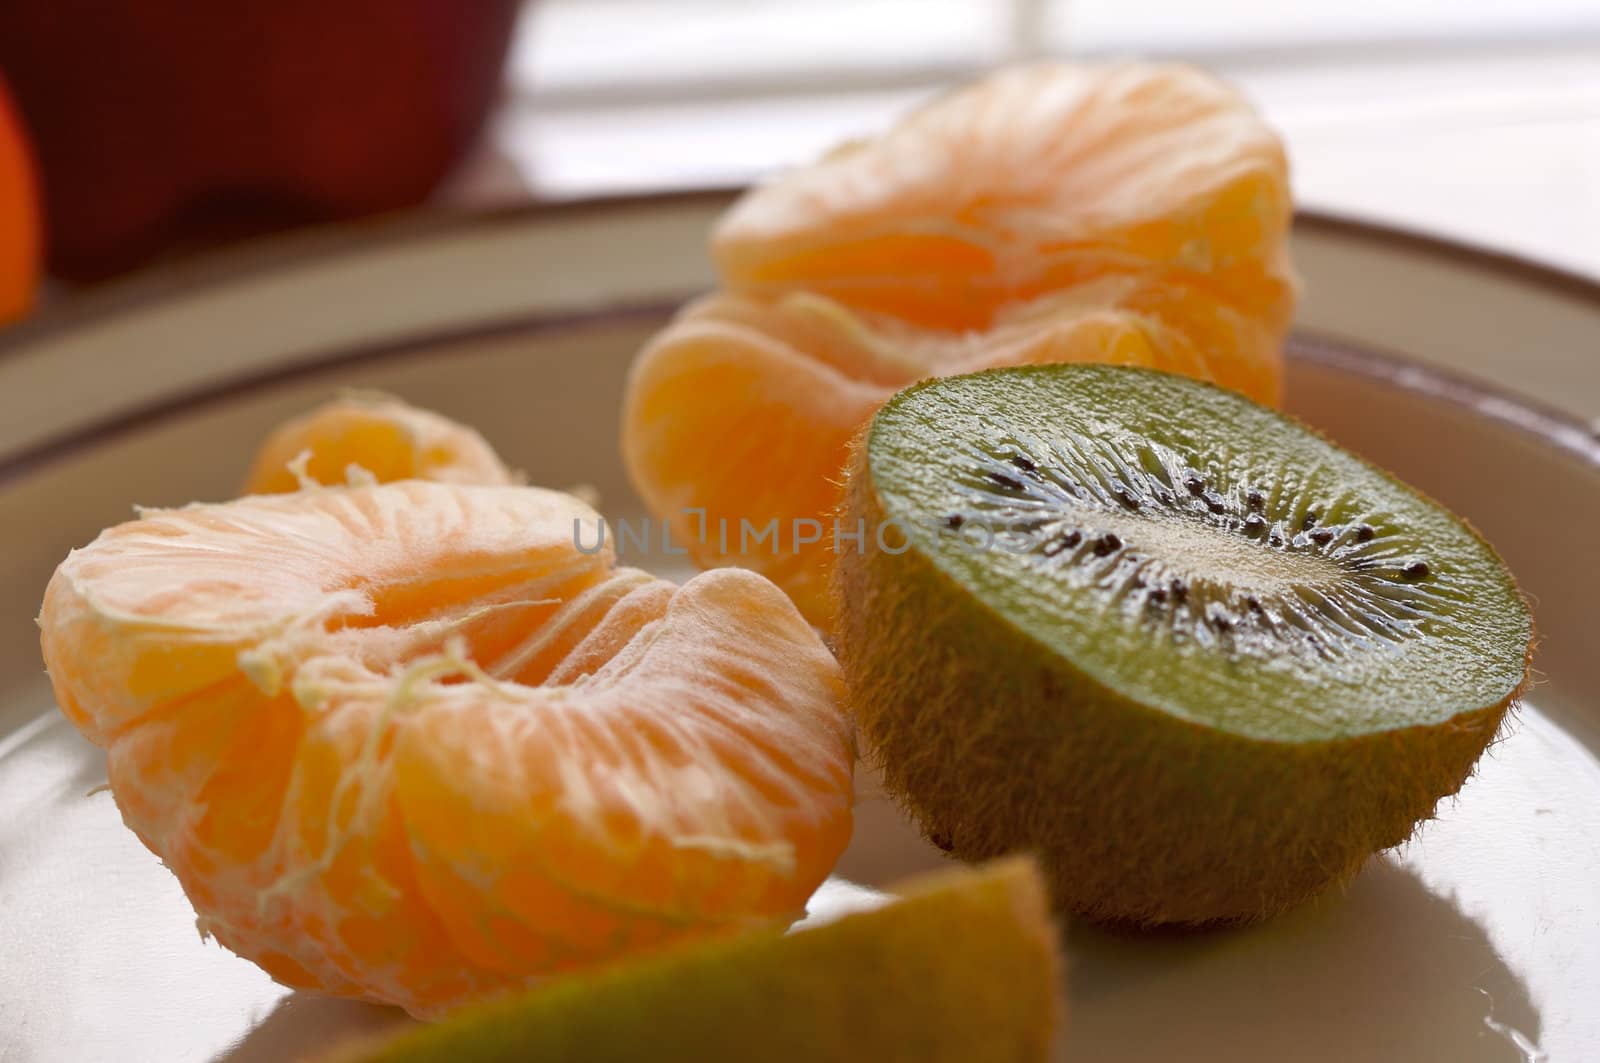 Kiwi and Clementine Tangerines on a plate in early morning light.